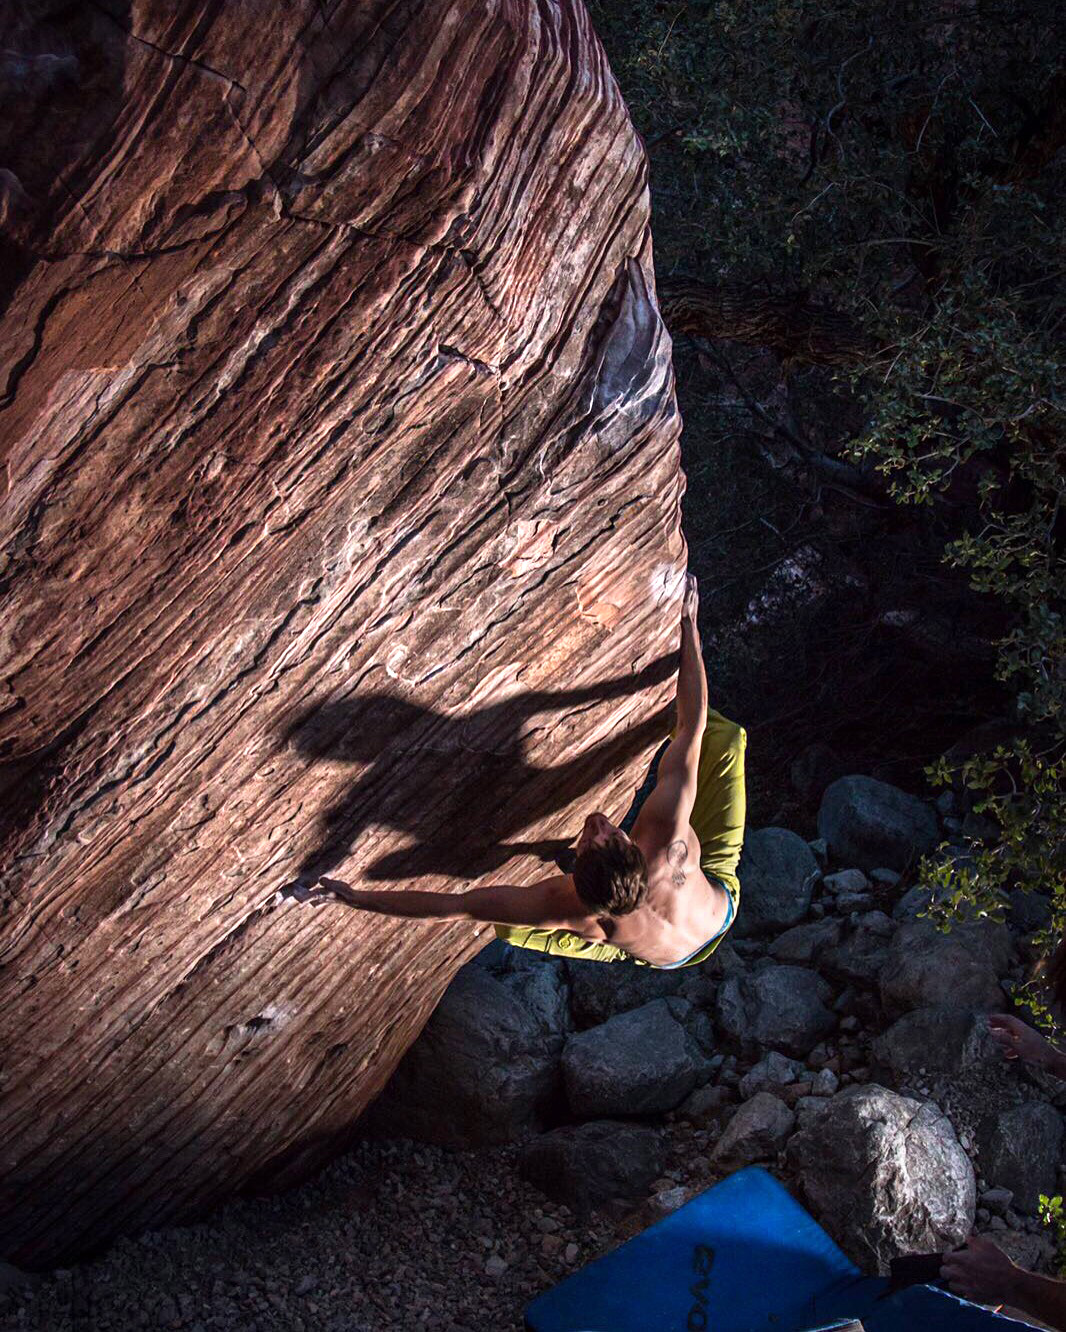 Pol Roca bouldering at Red Rocks during his US trip with Chris Sharma. Photo: Ricardo Giancola.